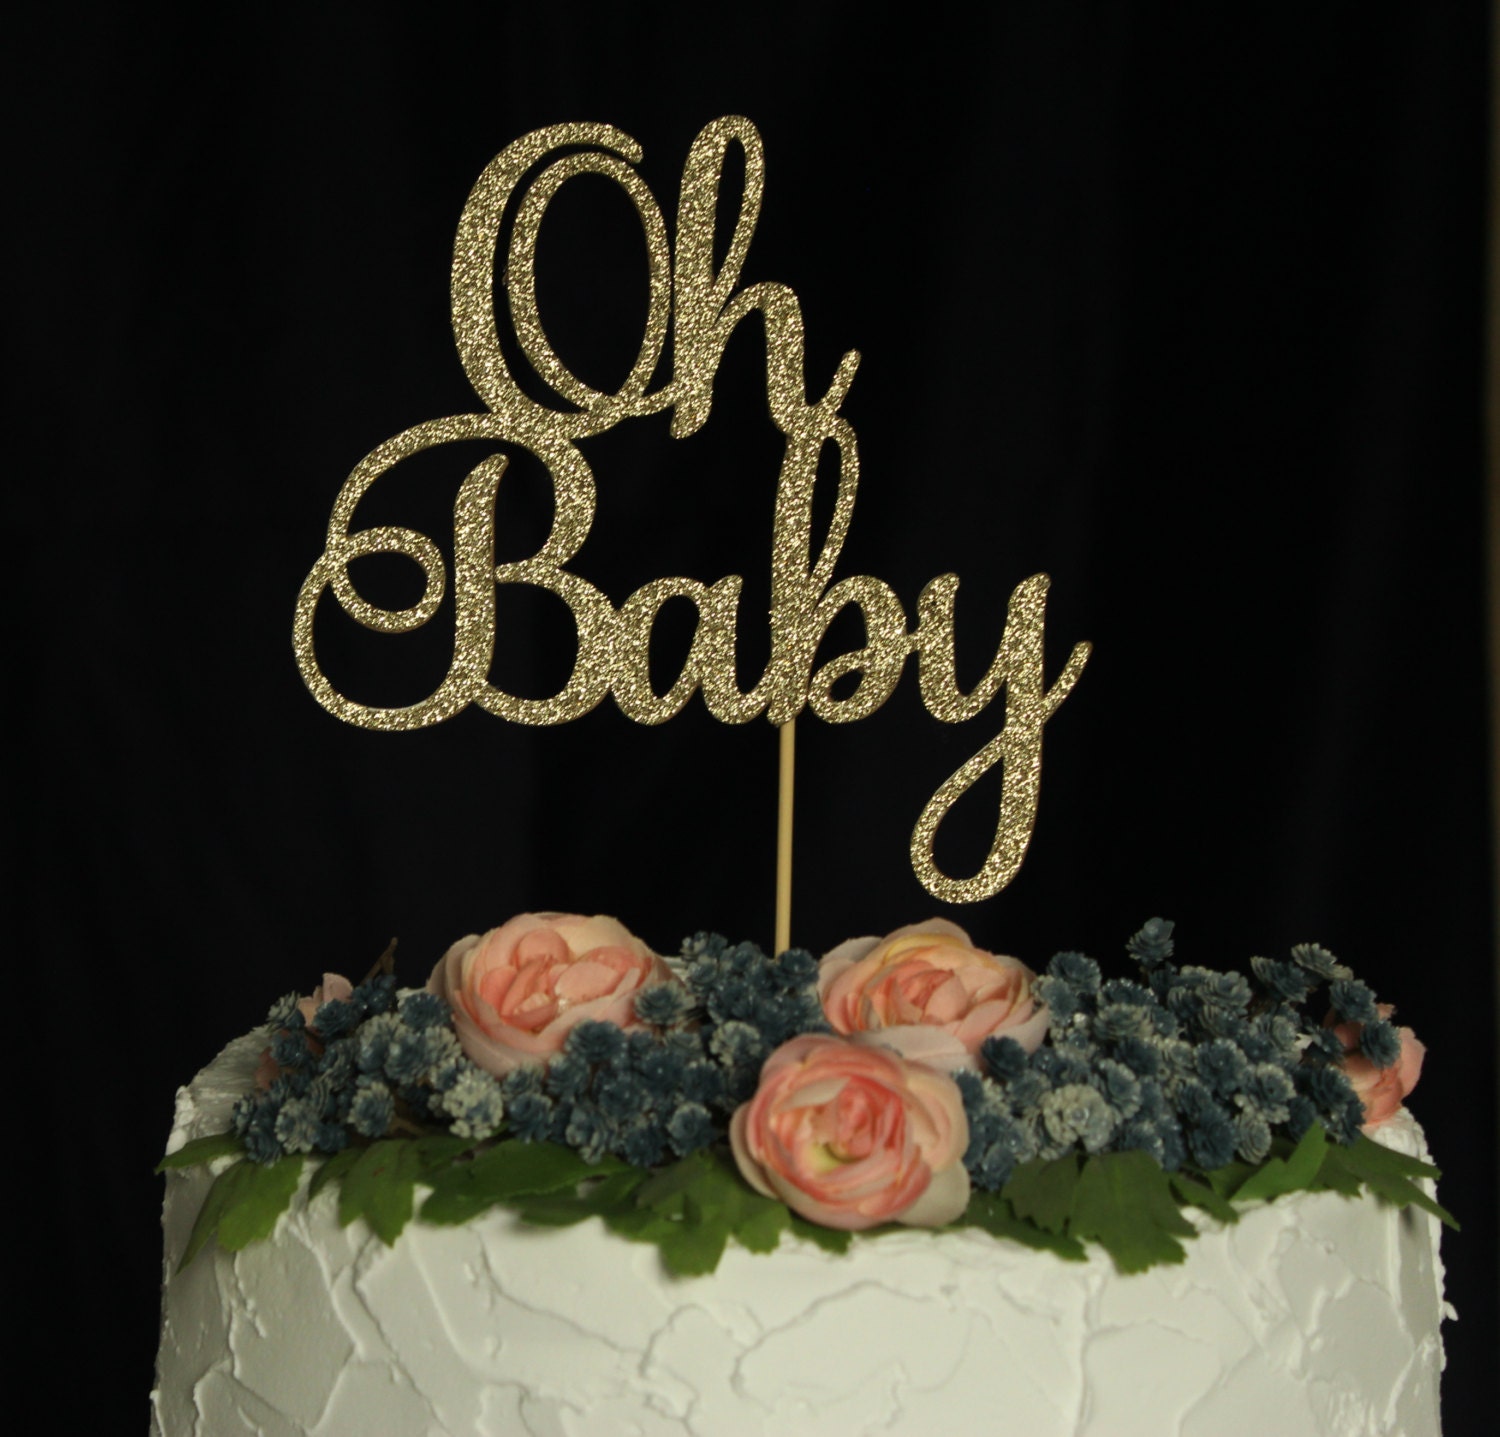 Oh Baby cake topper Cake topper Baby shower by AriellaRoseDesign